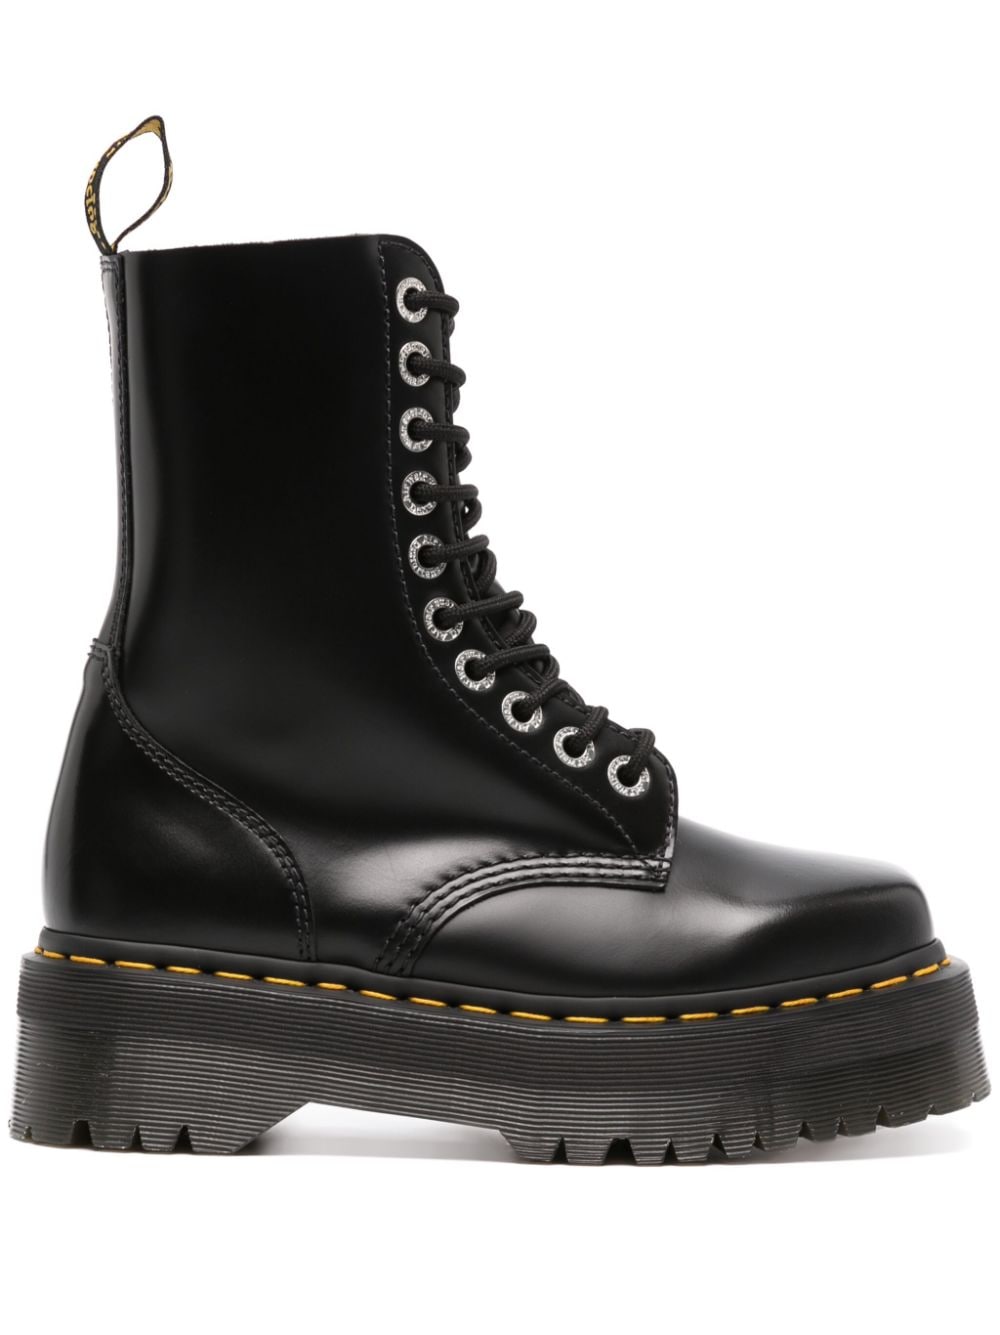 Dr. Martens 1490 Quad Squared Leather Boots - Farfetch